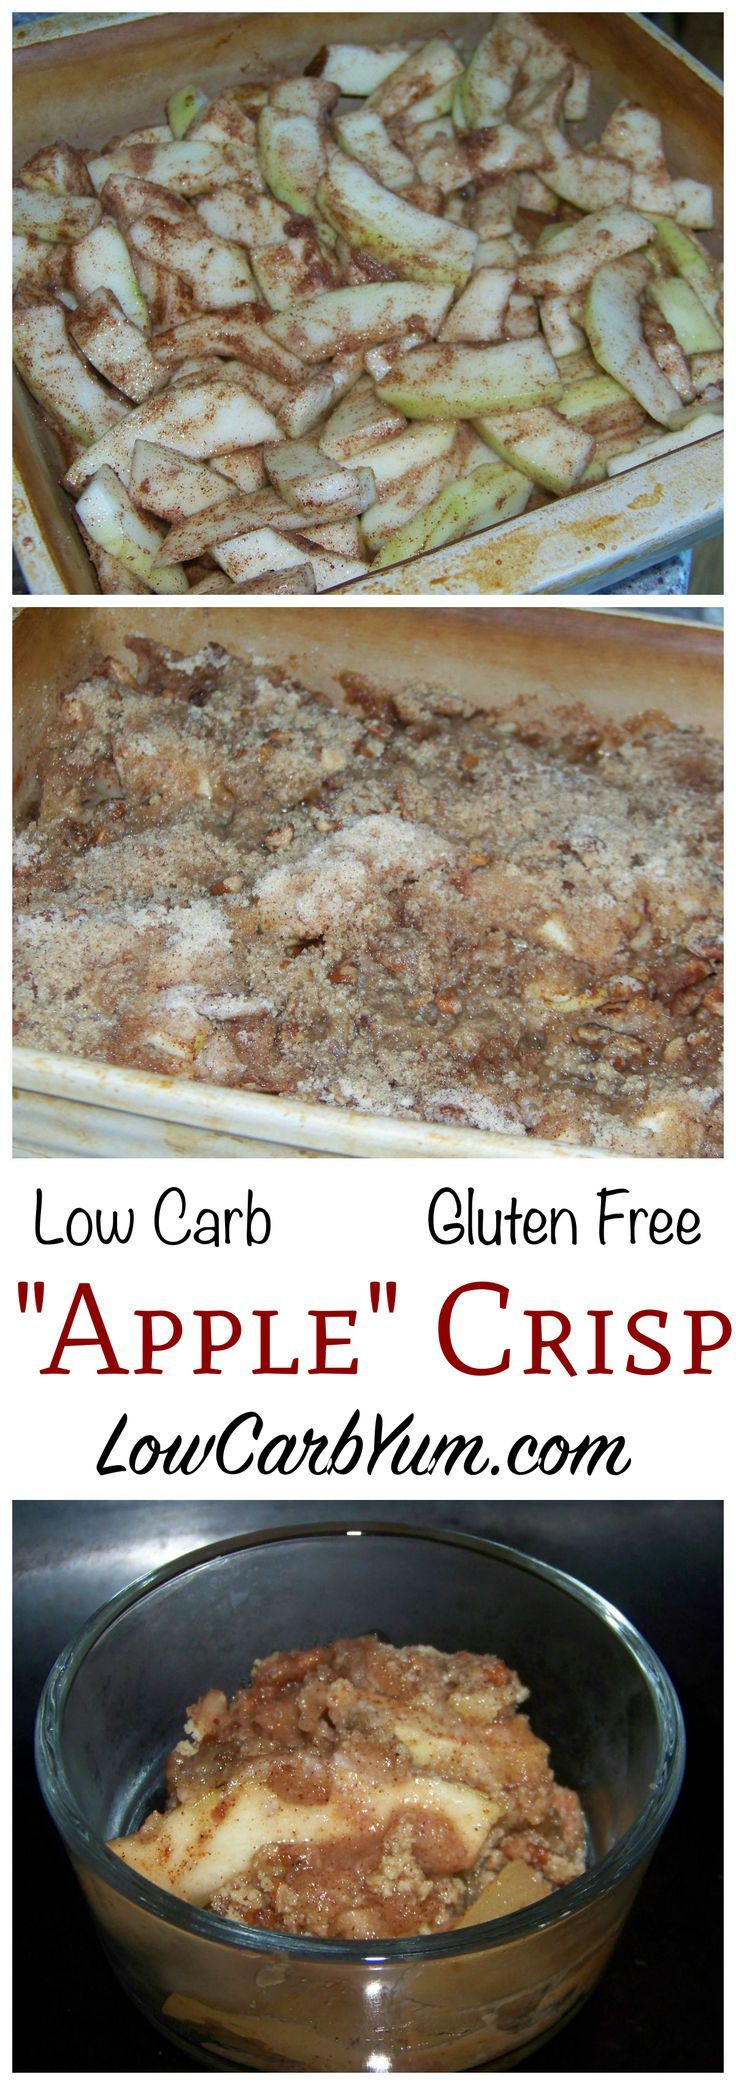 Low Carb Apple Recipes
 Apples are a forbidden fruit on the low carb t but